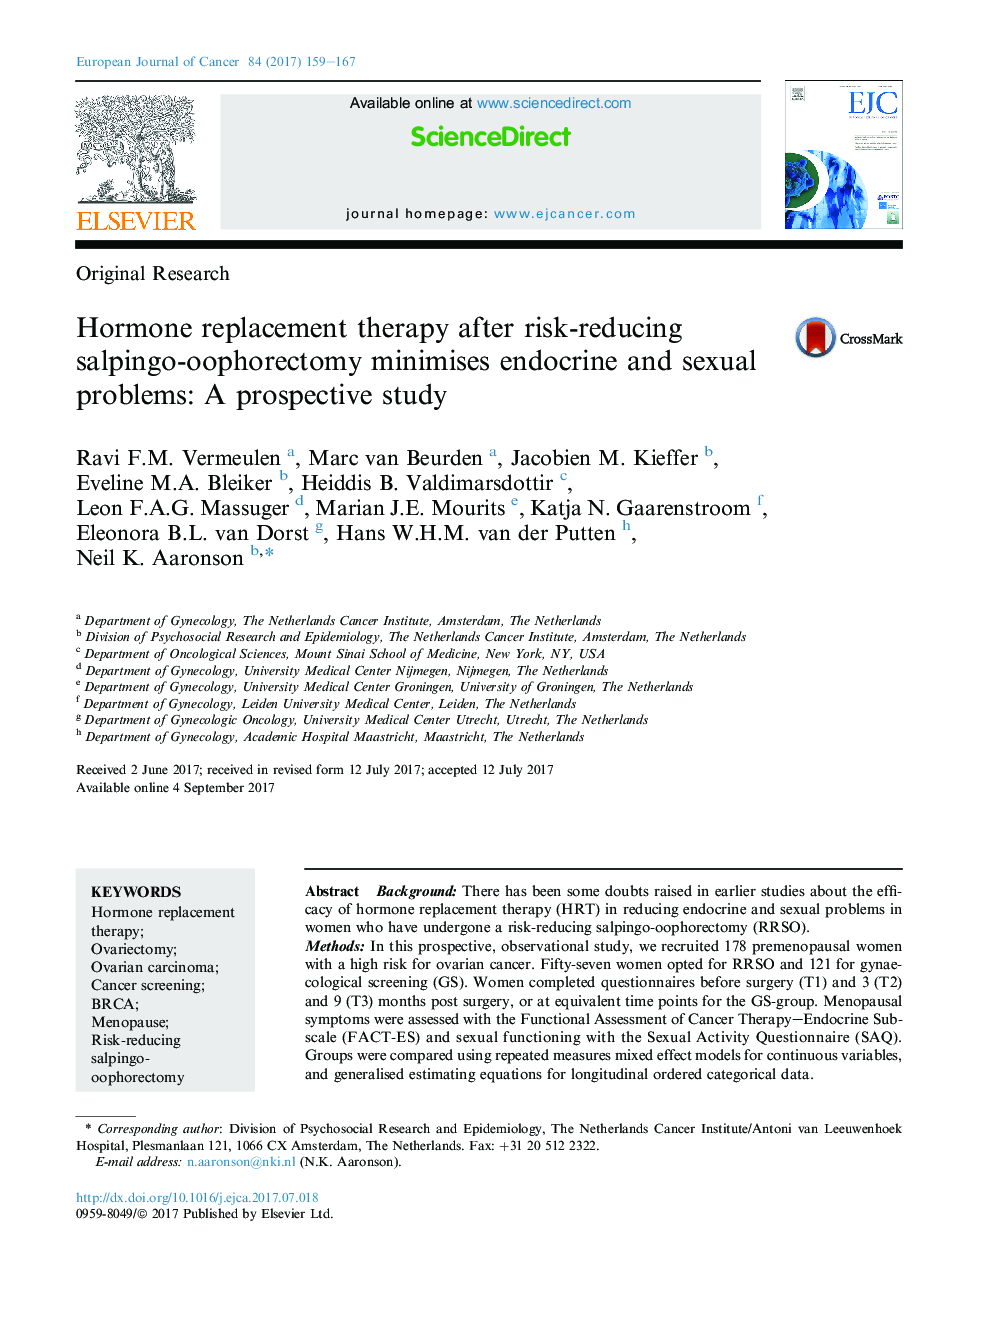 Original ResearchHormone replacement therapy after risk-reducing salpingo-oophorectomy minimises endocrine and sexual problems: A prospective study